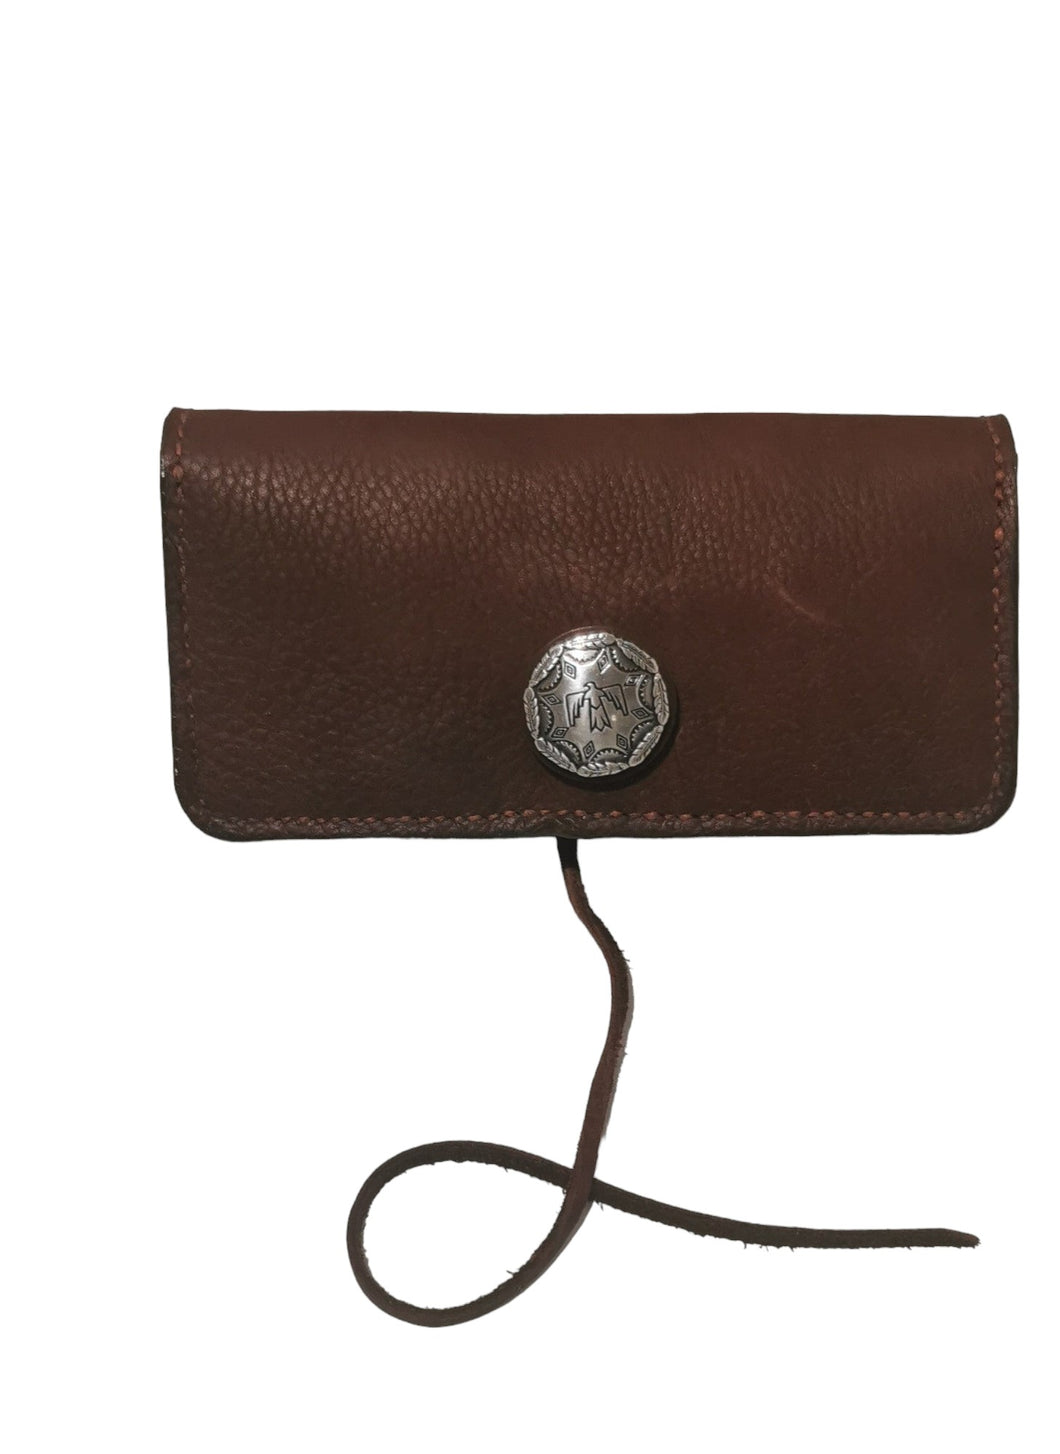 Long Wallet With Concho 1 of 1! Exclusive Long Wallet witch Concho Italian Finished Vegtan Interior, Soft Derrtan Cowhide Exterior. Cash Pockets, Card Pockets and Zipper Coin pouch. Chocolate Brown